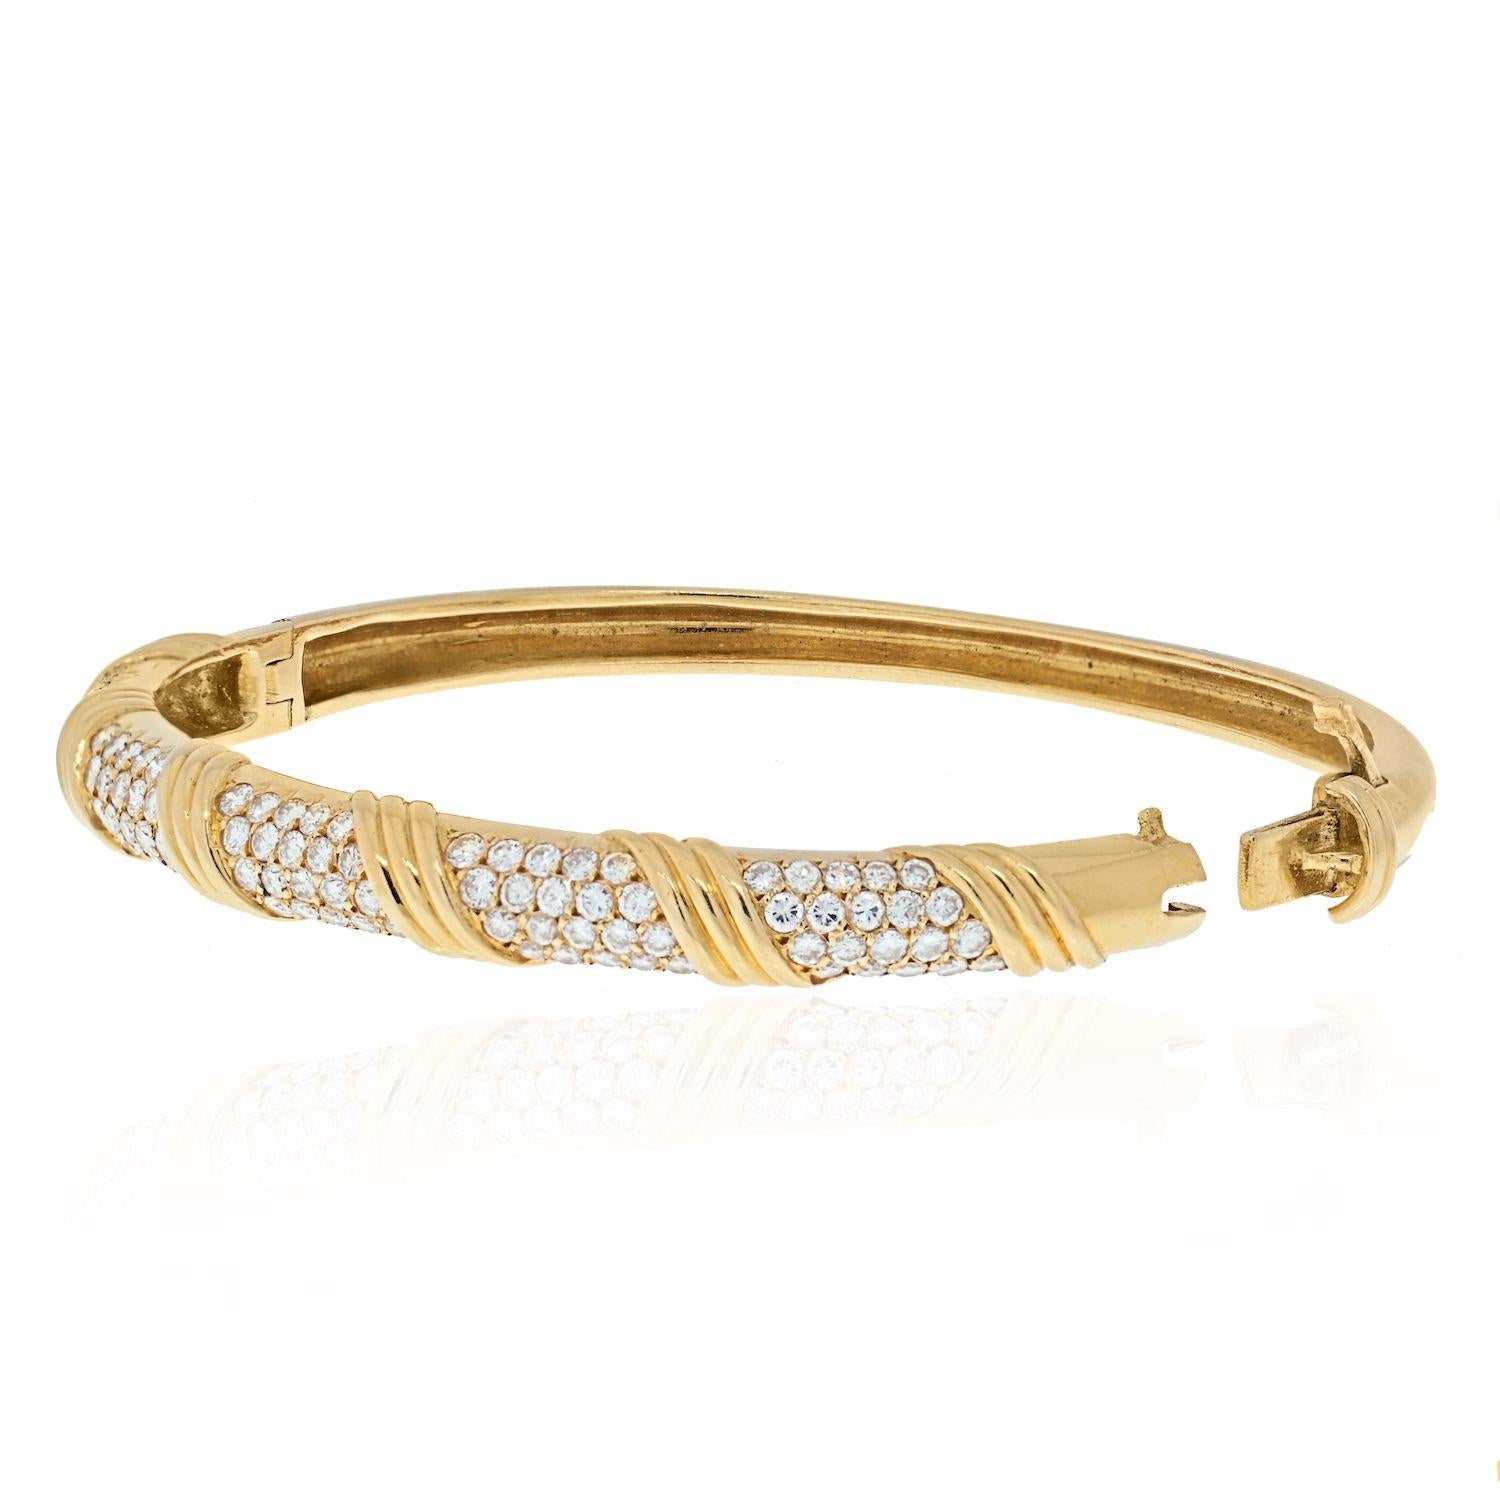 Vintage Van Cleef and Arpels French Bracelet. Intricate gold work and rows of diamonds. 
Signed Van Cleef and Arpels, French, Circa 1970.
Diamonds: Round Diamonds 4.00cts 
Width: 6.5mm
Wrist Size: 6.25 inches
